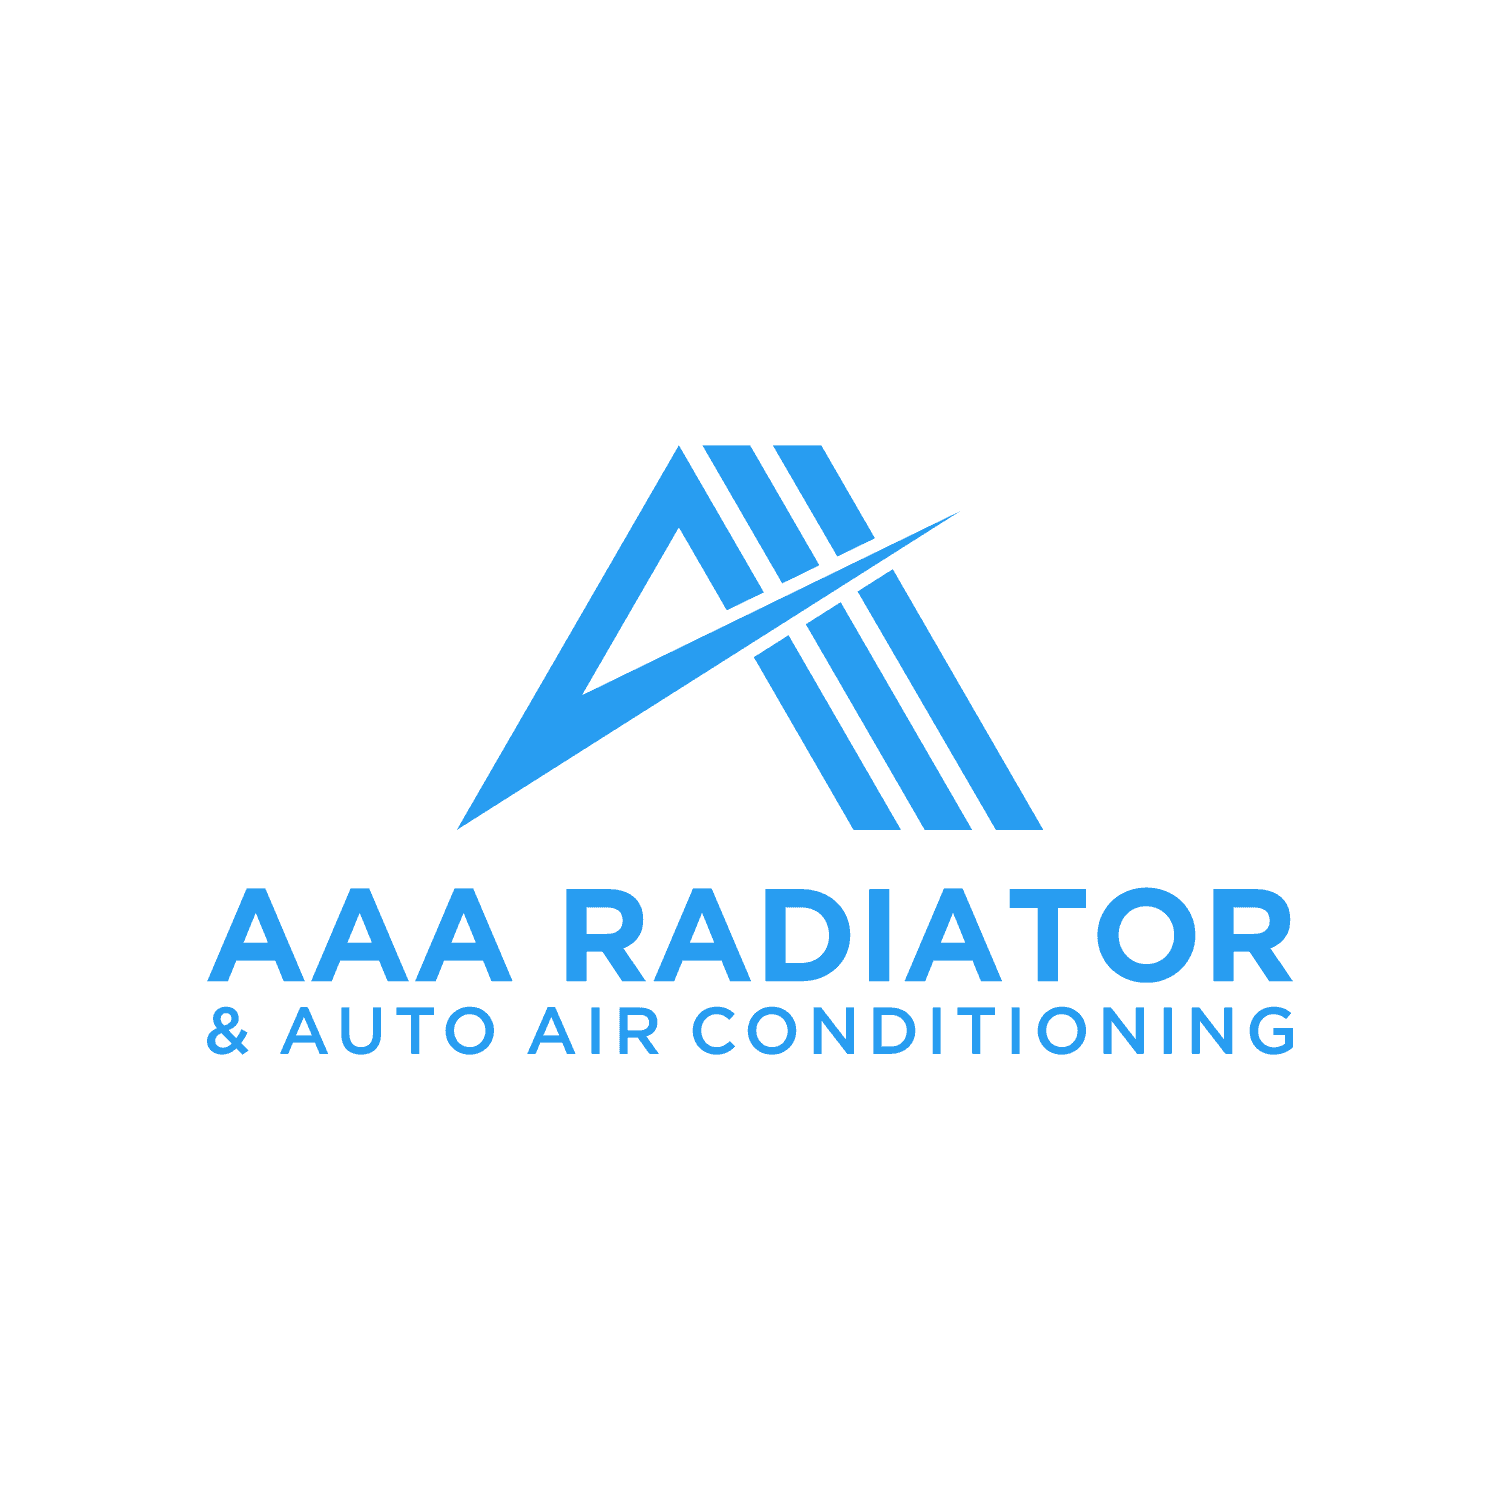 Car A/C Repair AAA Radiator And Auto Air Conditioning